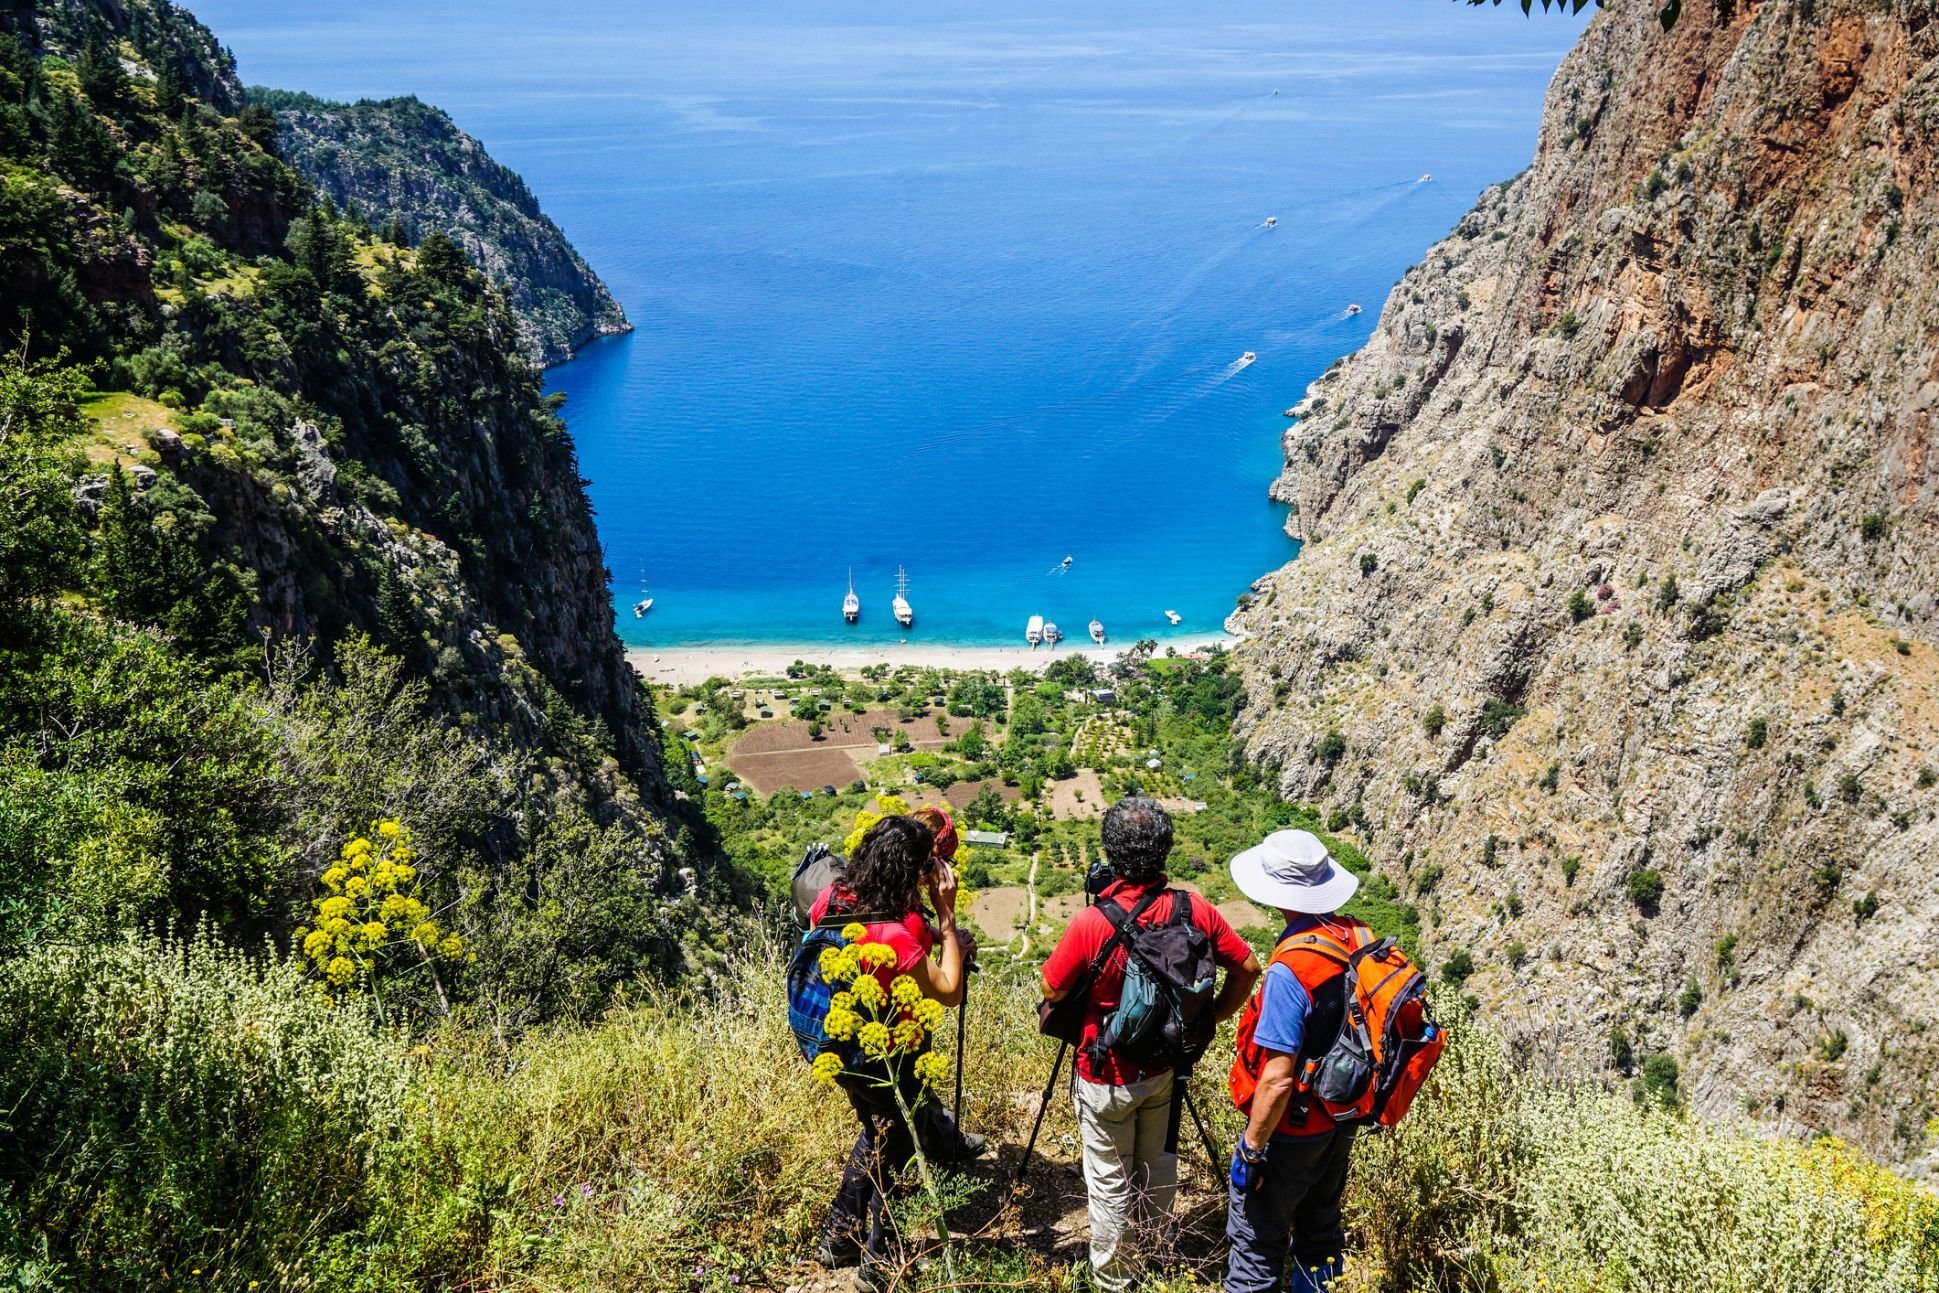 Tourists look down over gorgeous Butterfly Valley, on Turkey's Turquoise Coast.